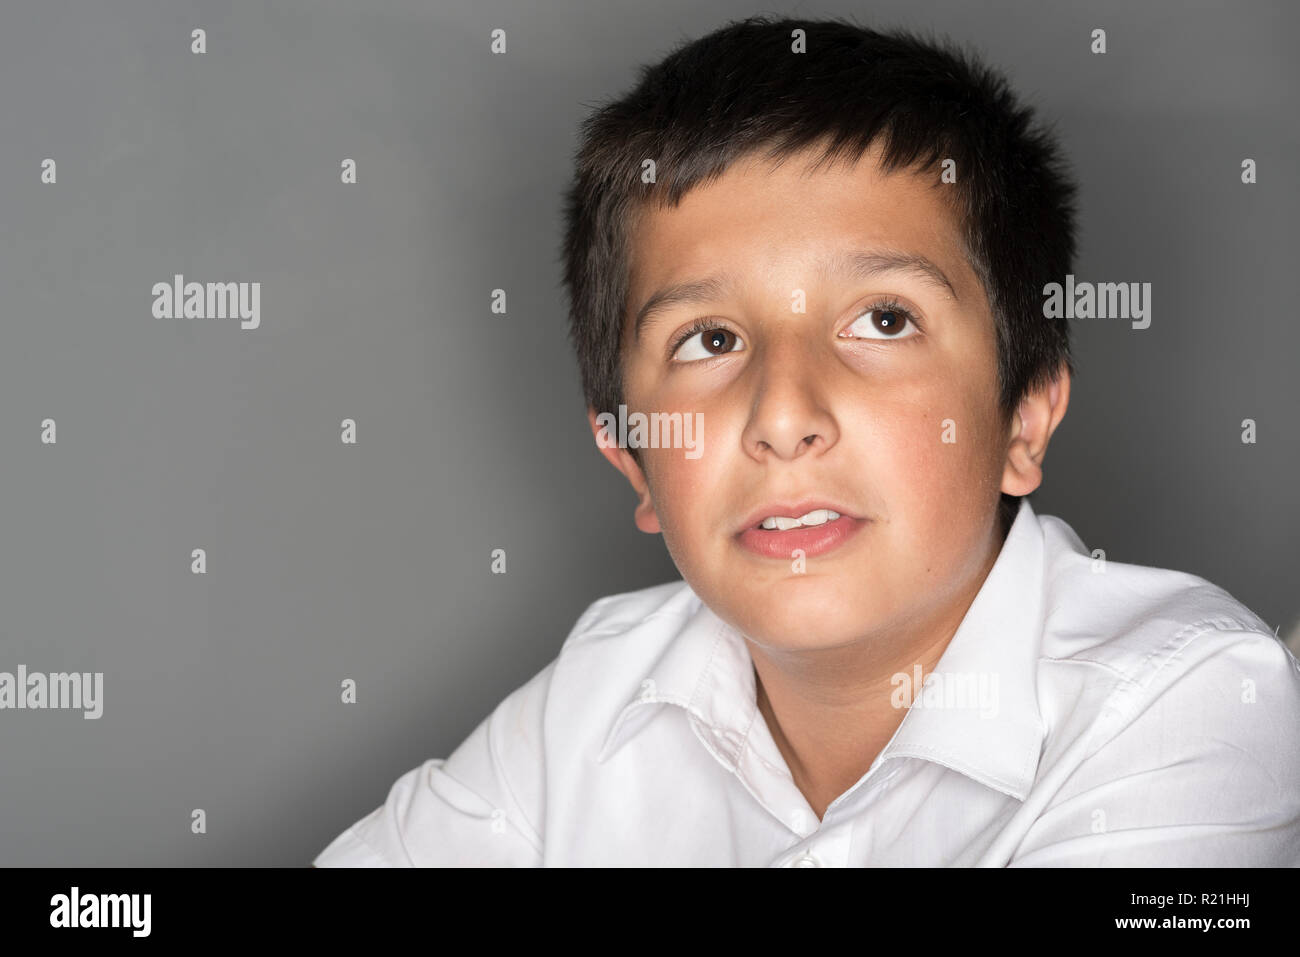 UK, head and shoulders portrait of a young schoolboy in school uniform on grey background Stock Photo